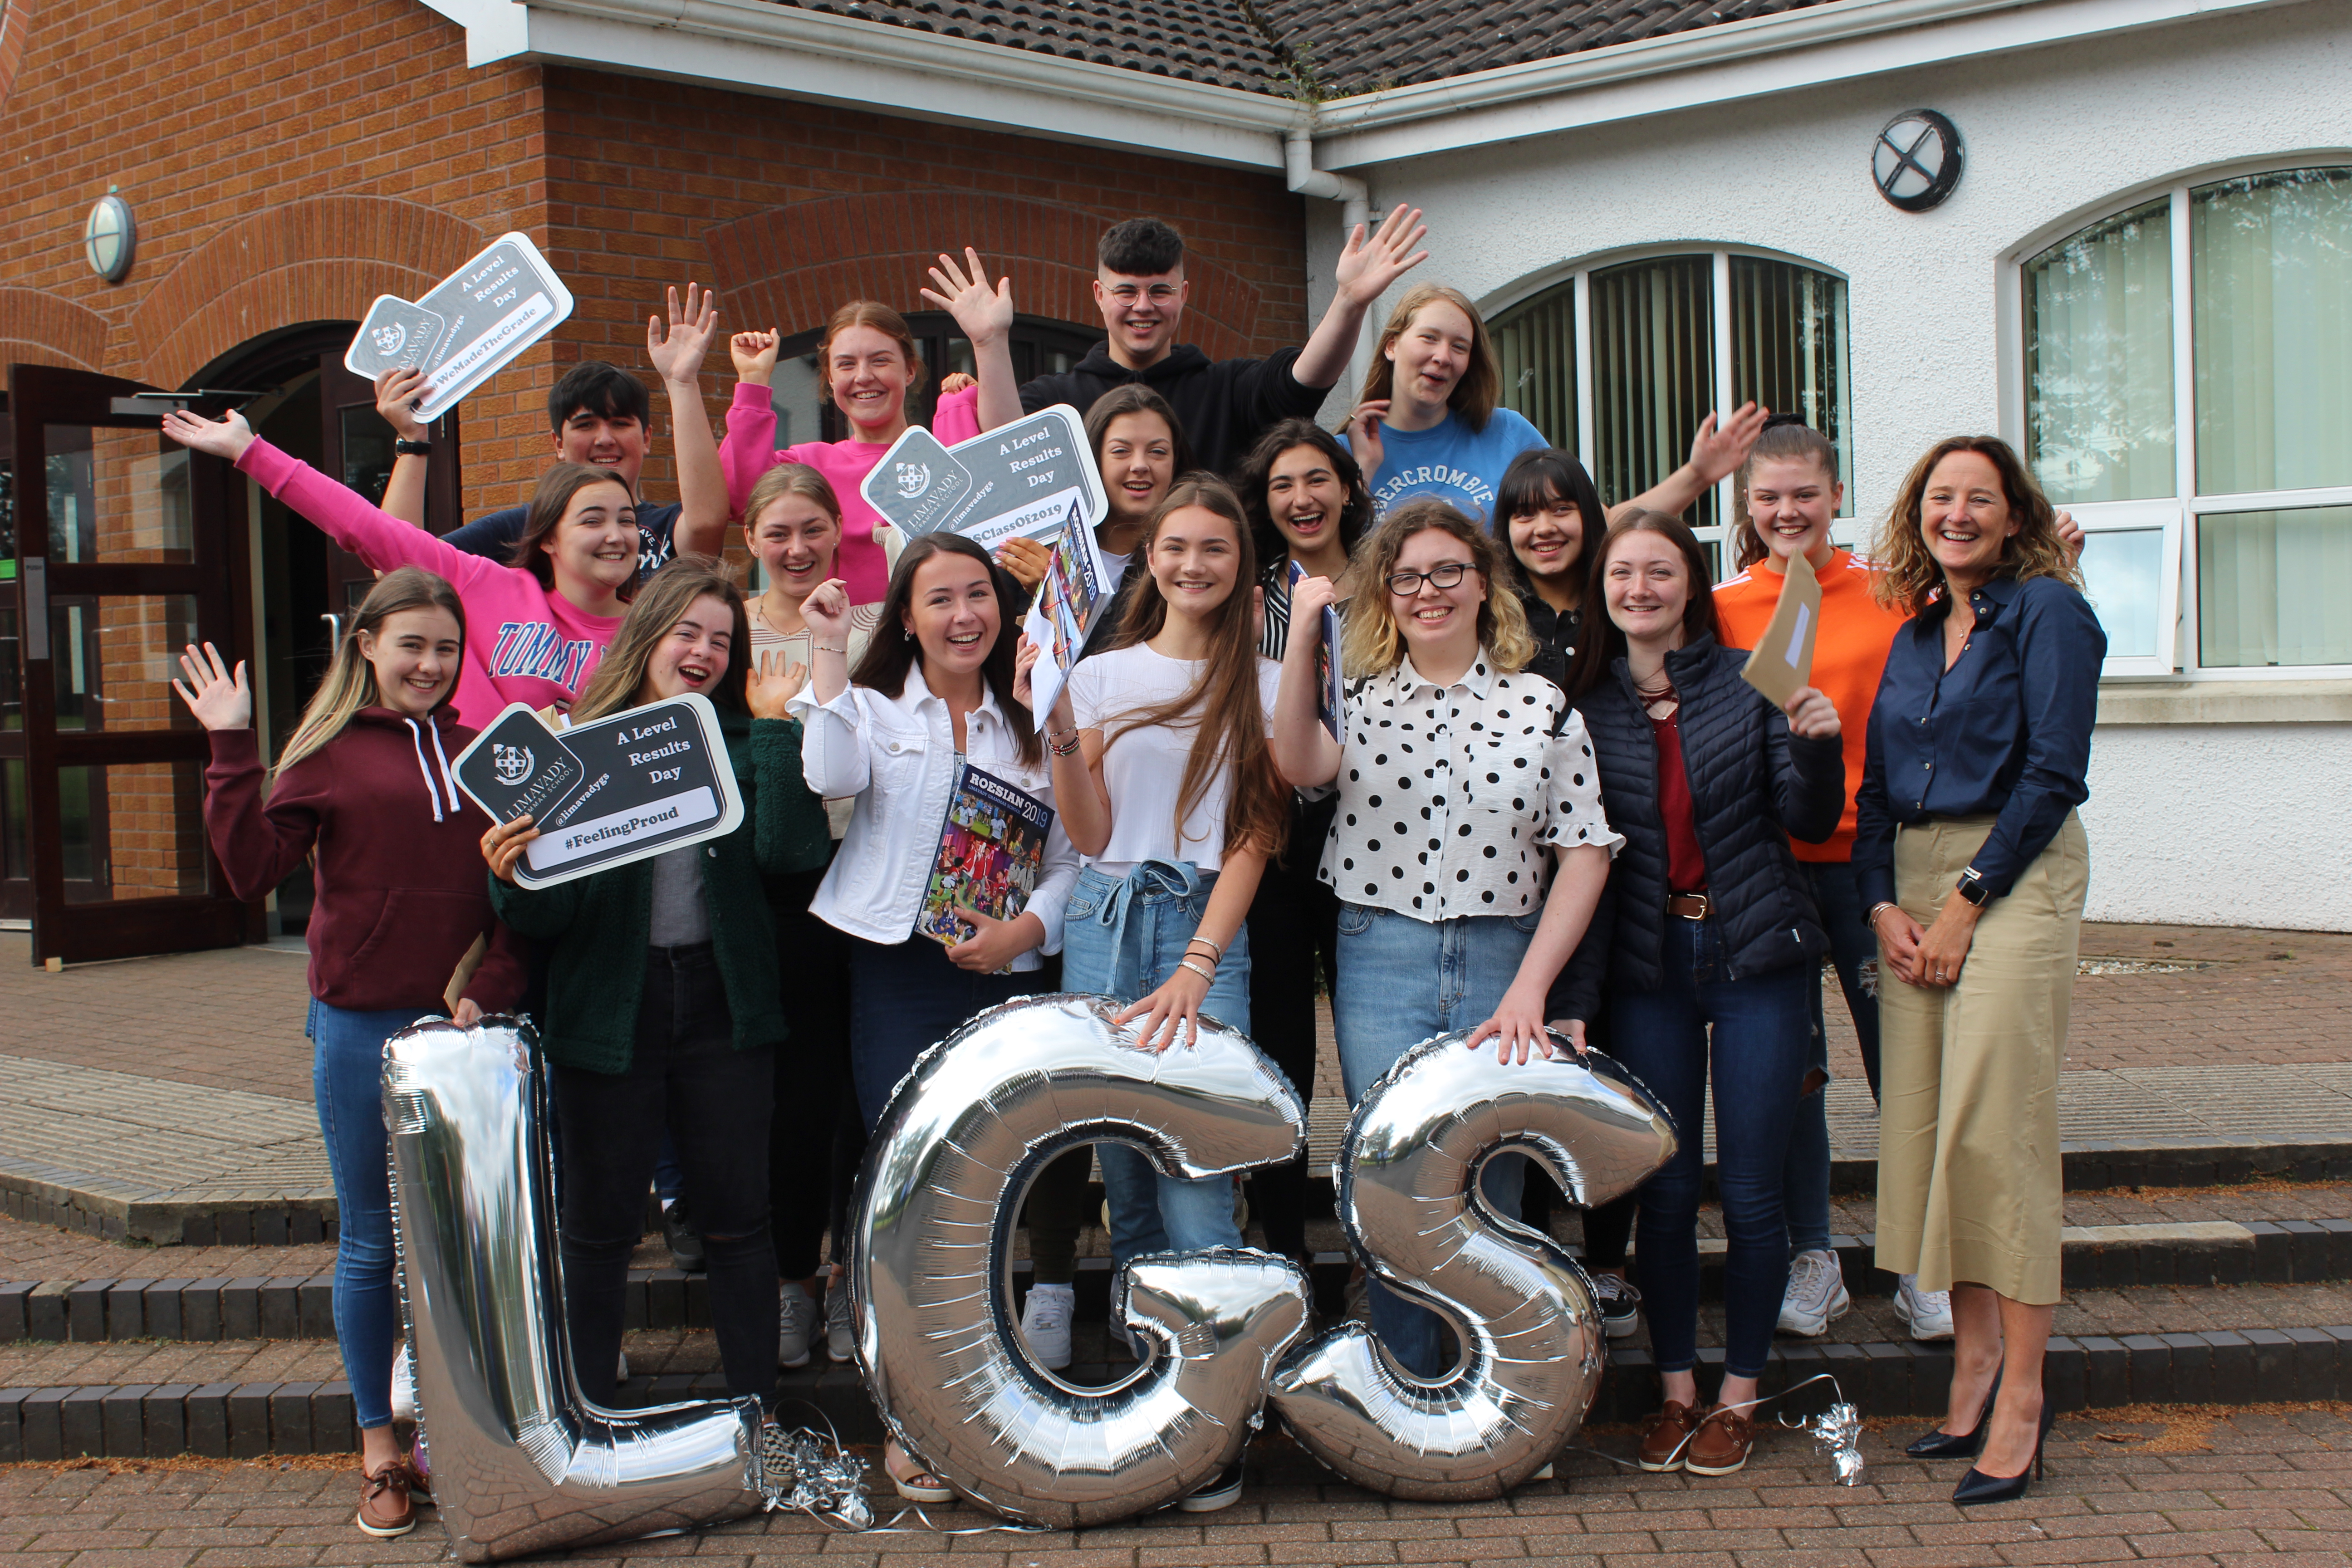 Students and staff from Limavady Grammar School celebrate A level results